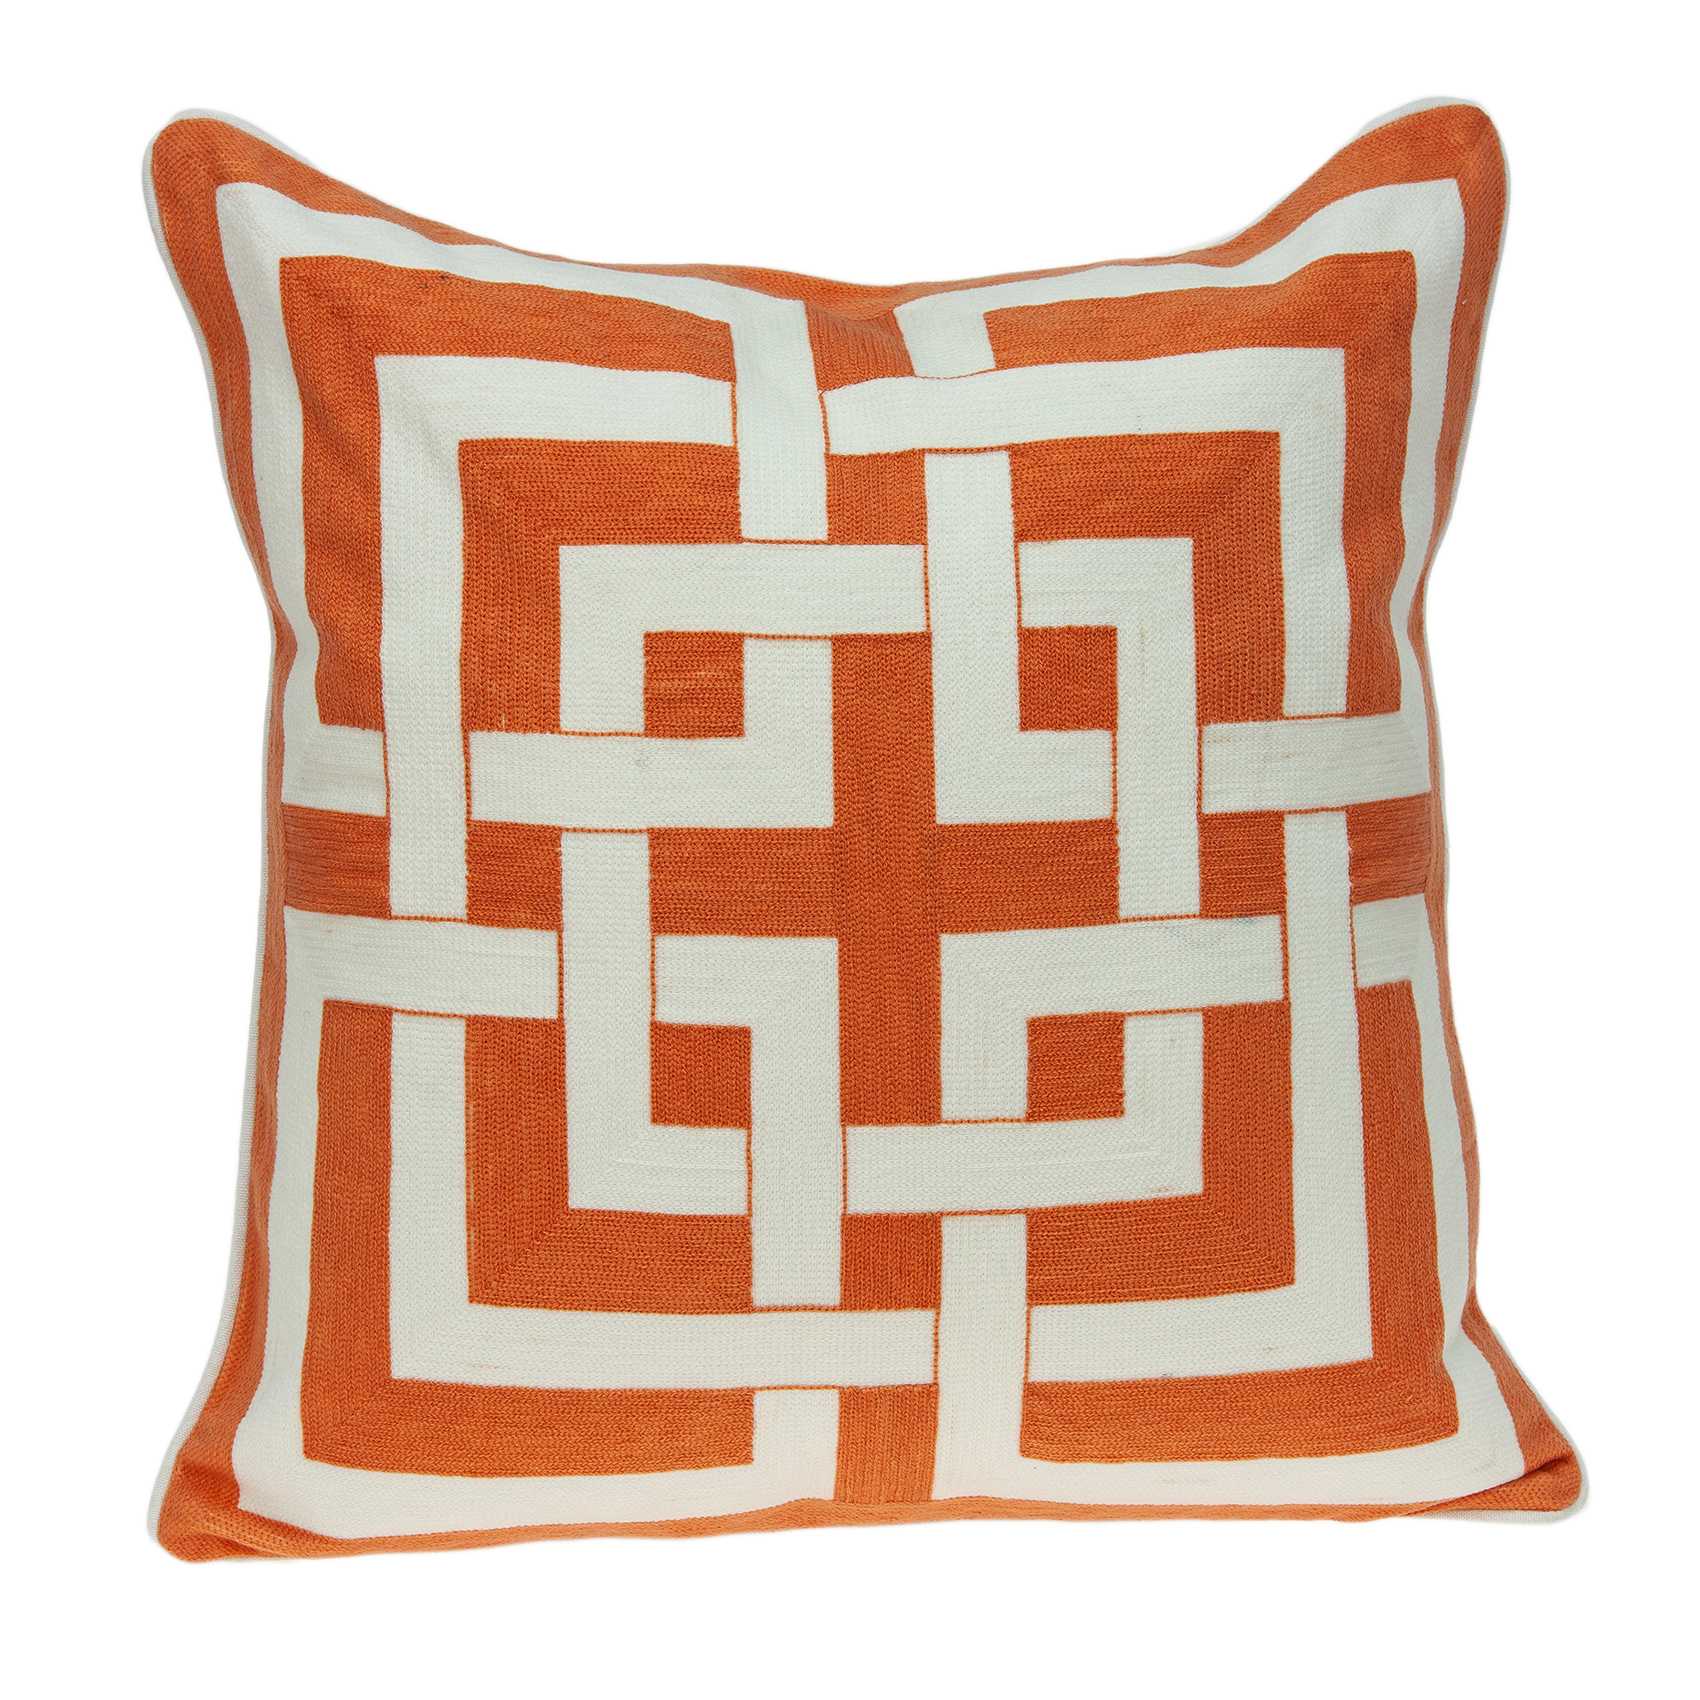 20" x 0.5" x 20" Transitional Orange And White Accent Pillow Cover